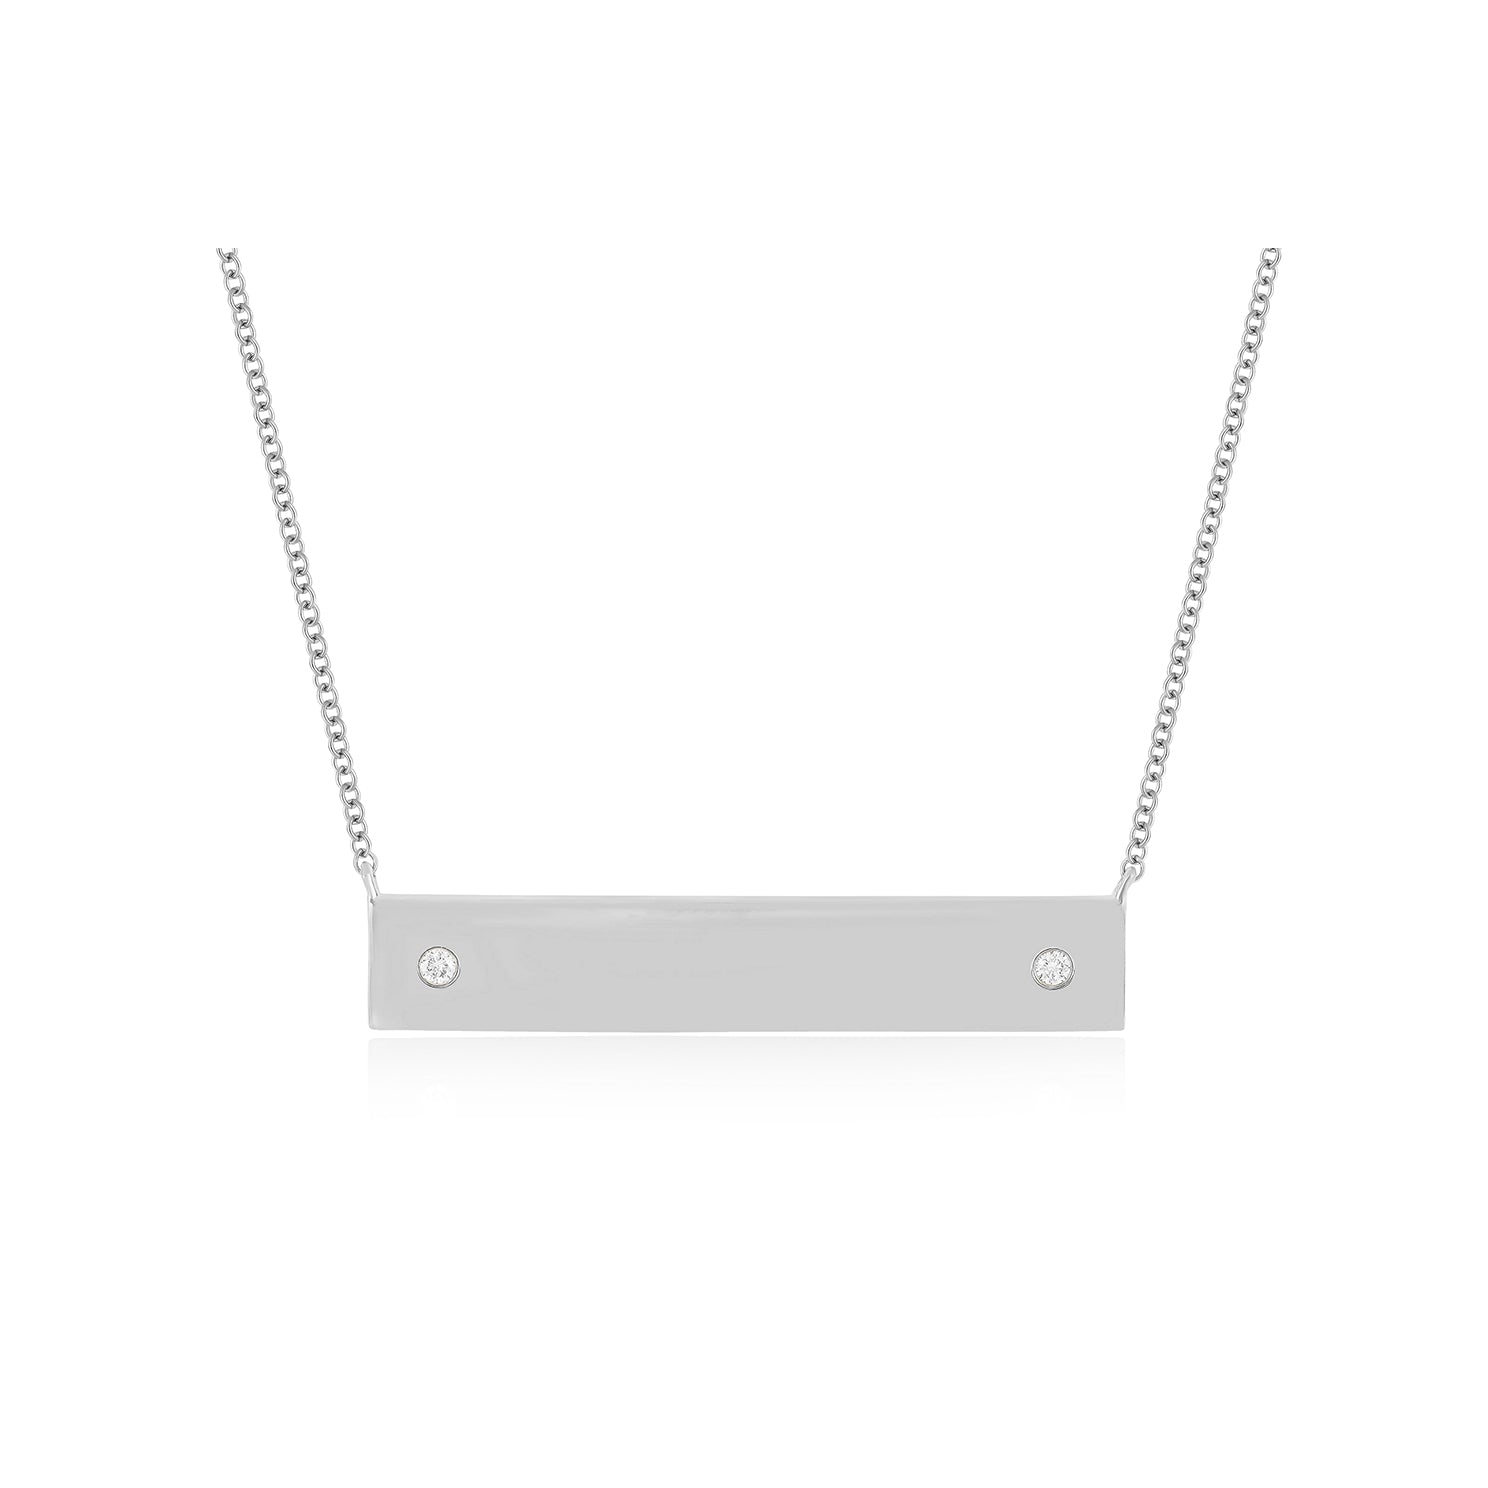 Nameplate Necklace in 14k white gold